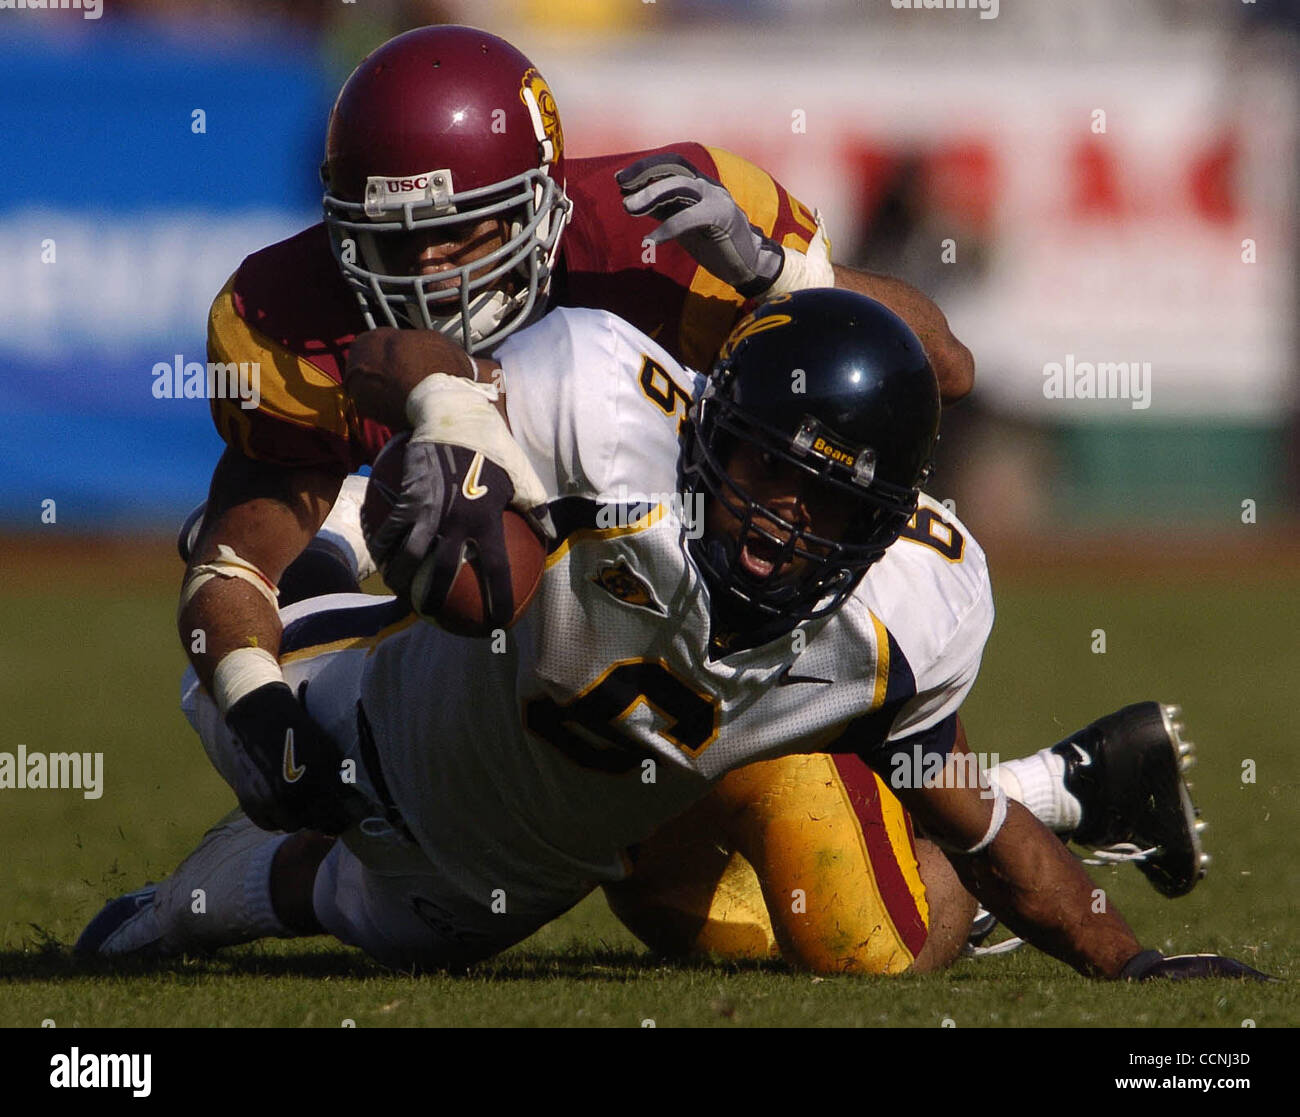 Saturday 23 October 2004 High Resolution Stock Photography and Images -  Alamy